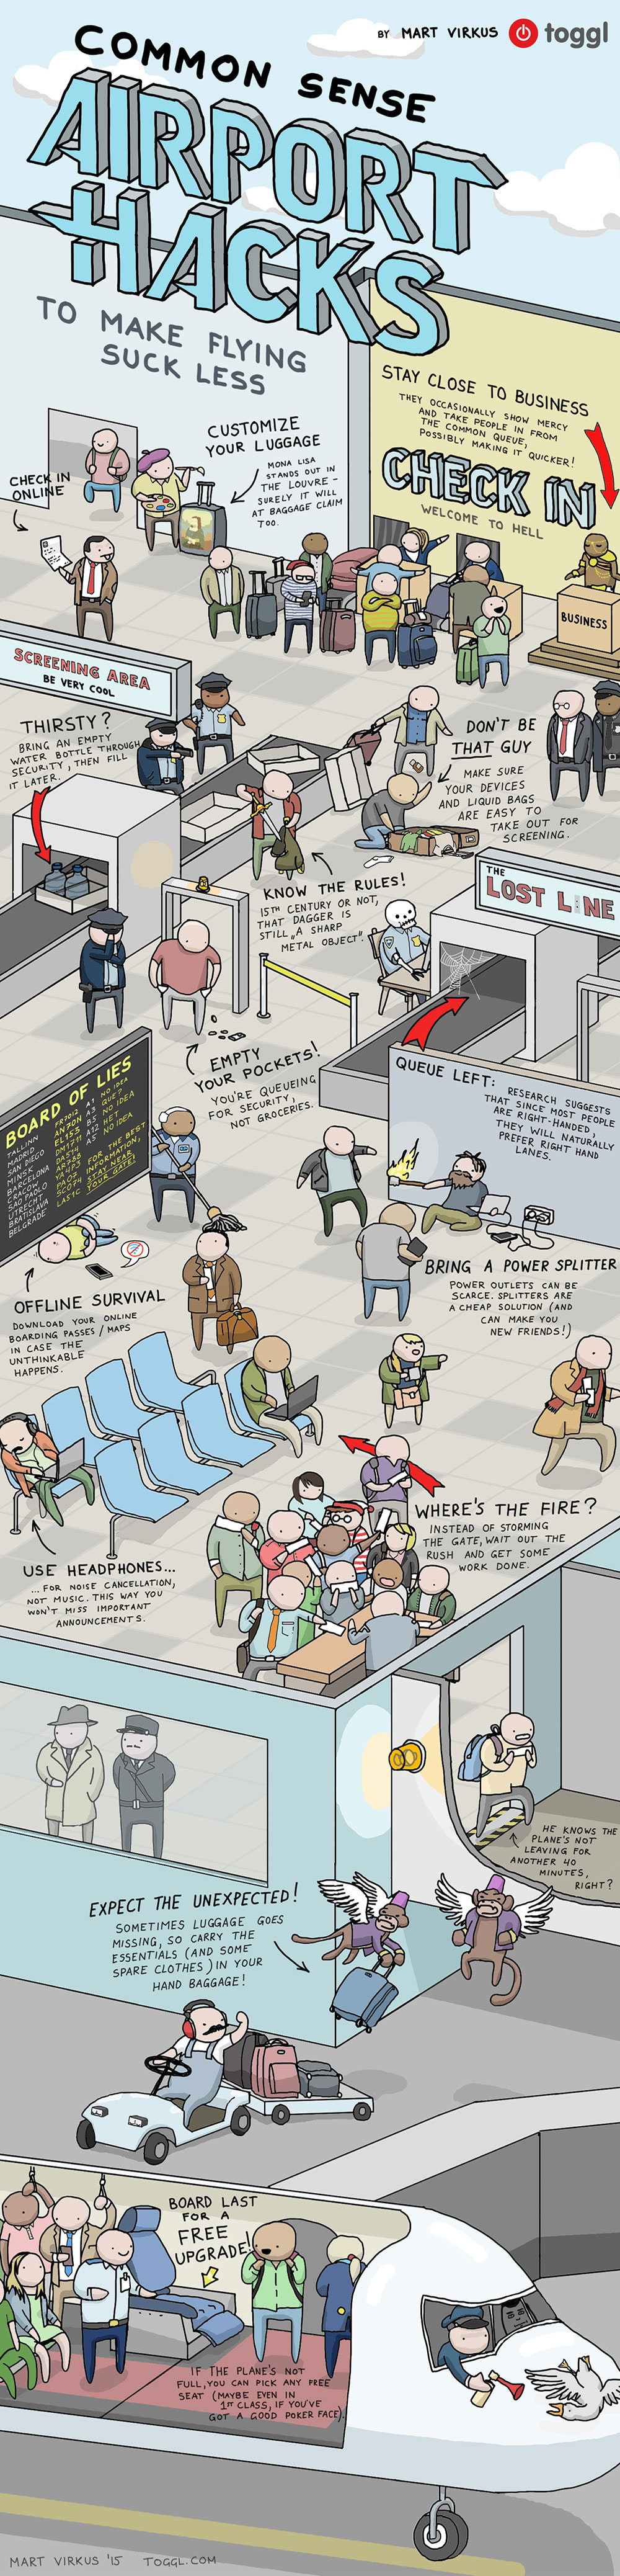 Awesome Airport Hacks to Make Flying Suck Less